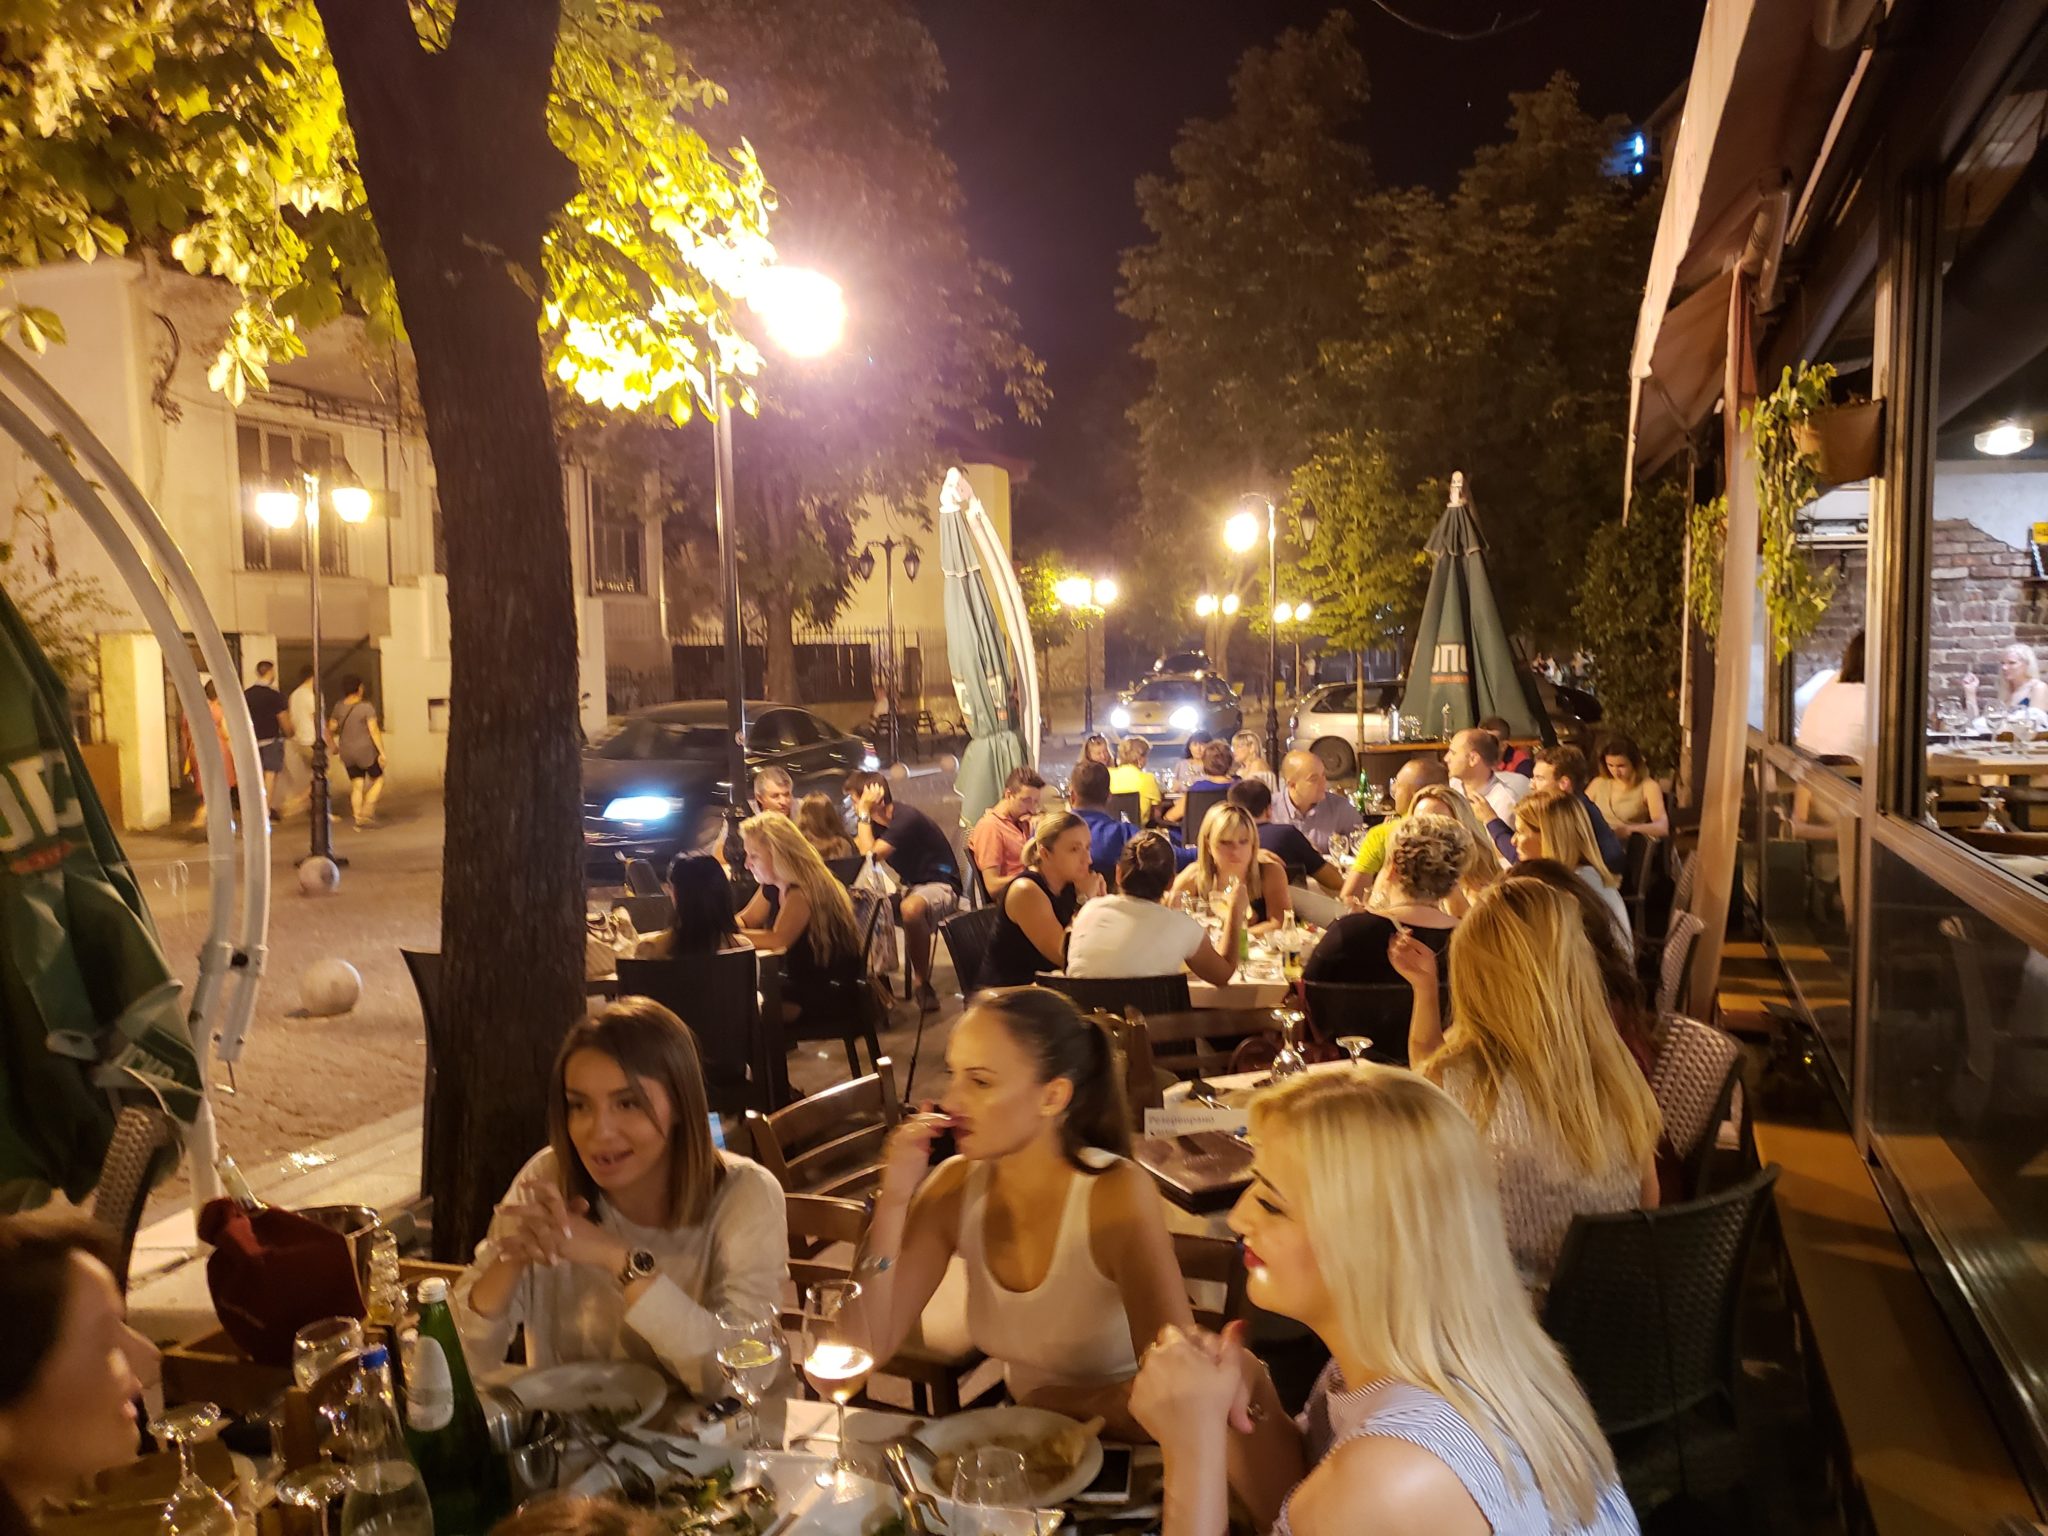 a group of people sitting at tables outside at night